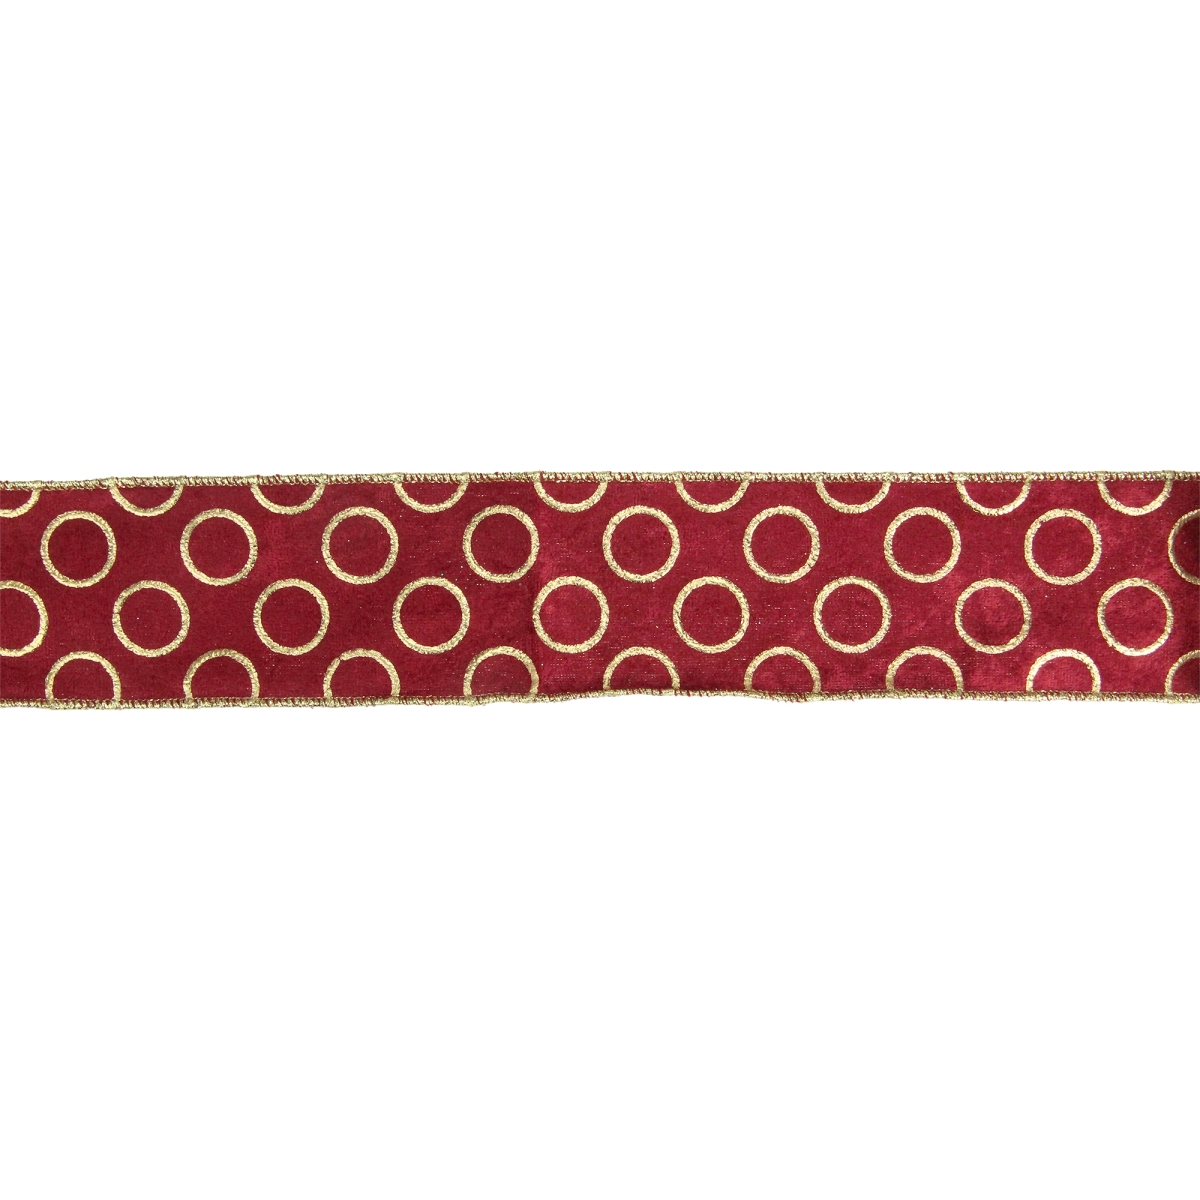 2.5 in. x 16 yards Metallic Red & Gold Circle Wired Craft Ribbon -  Go-Go, GO1800274